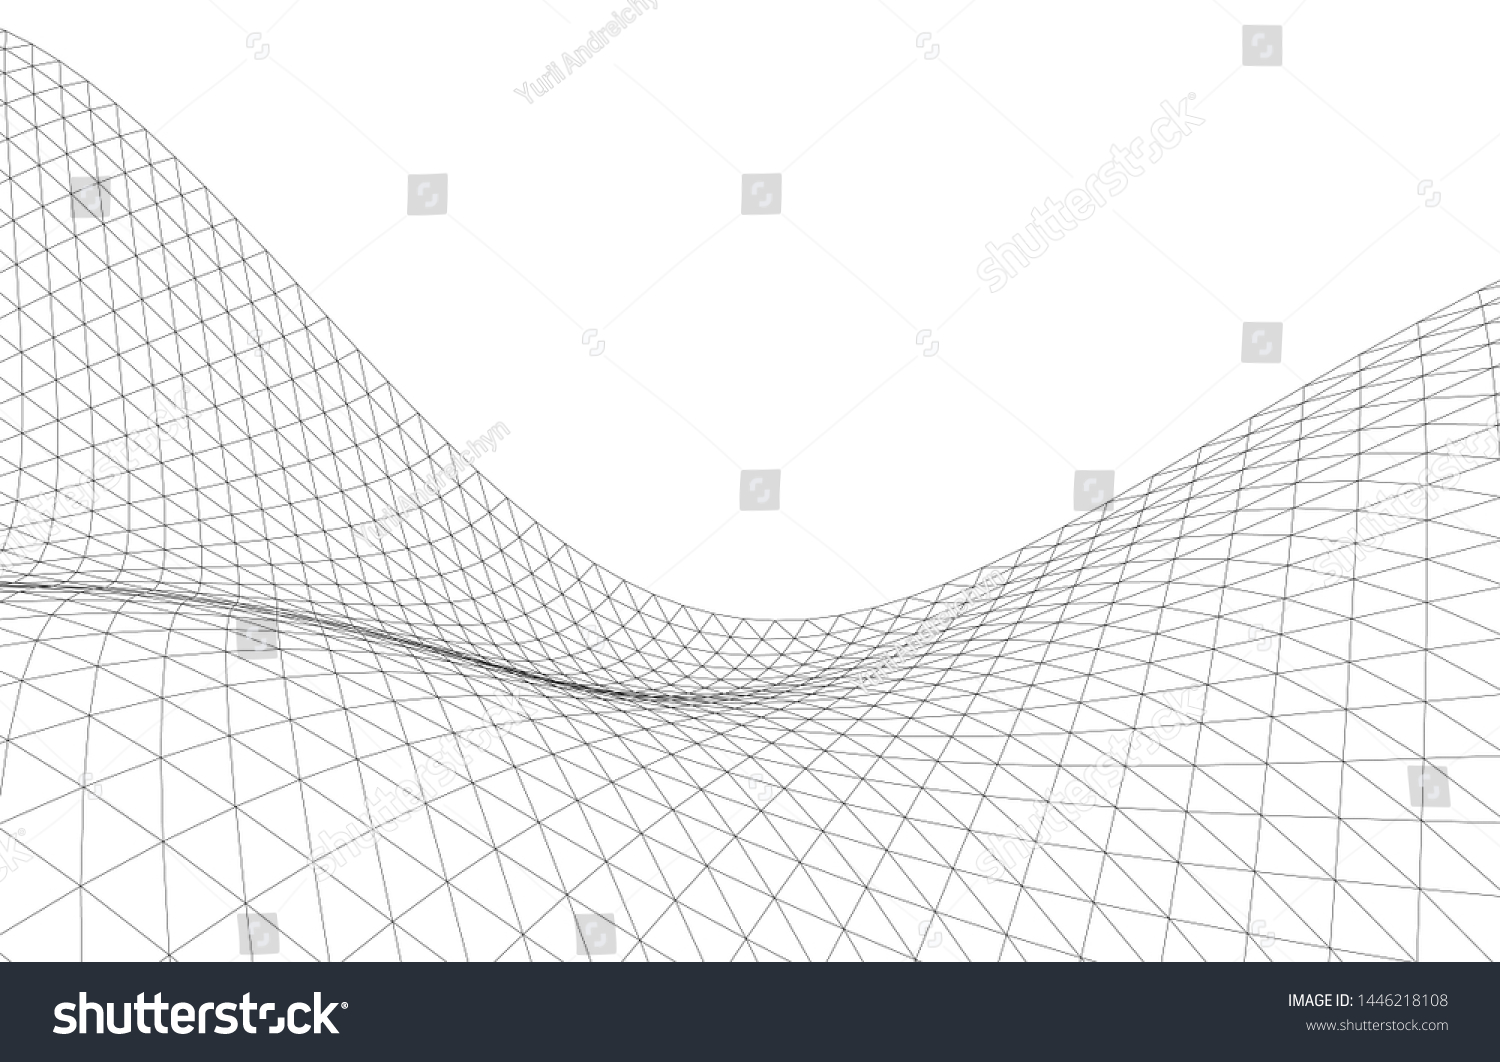 Architectural Drawing Geometric Background 3d Stock Vector (Royalty ...